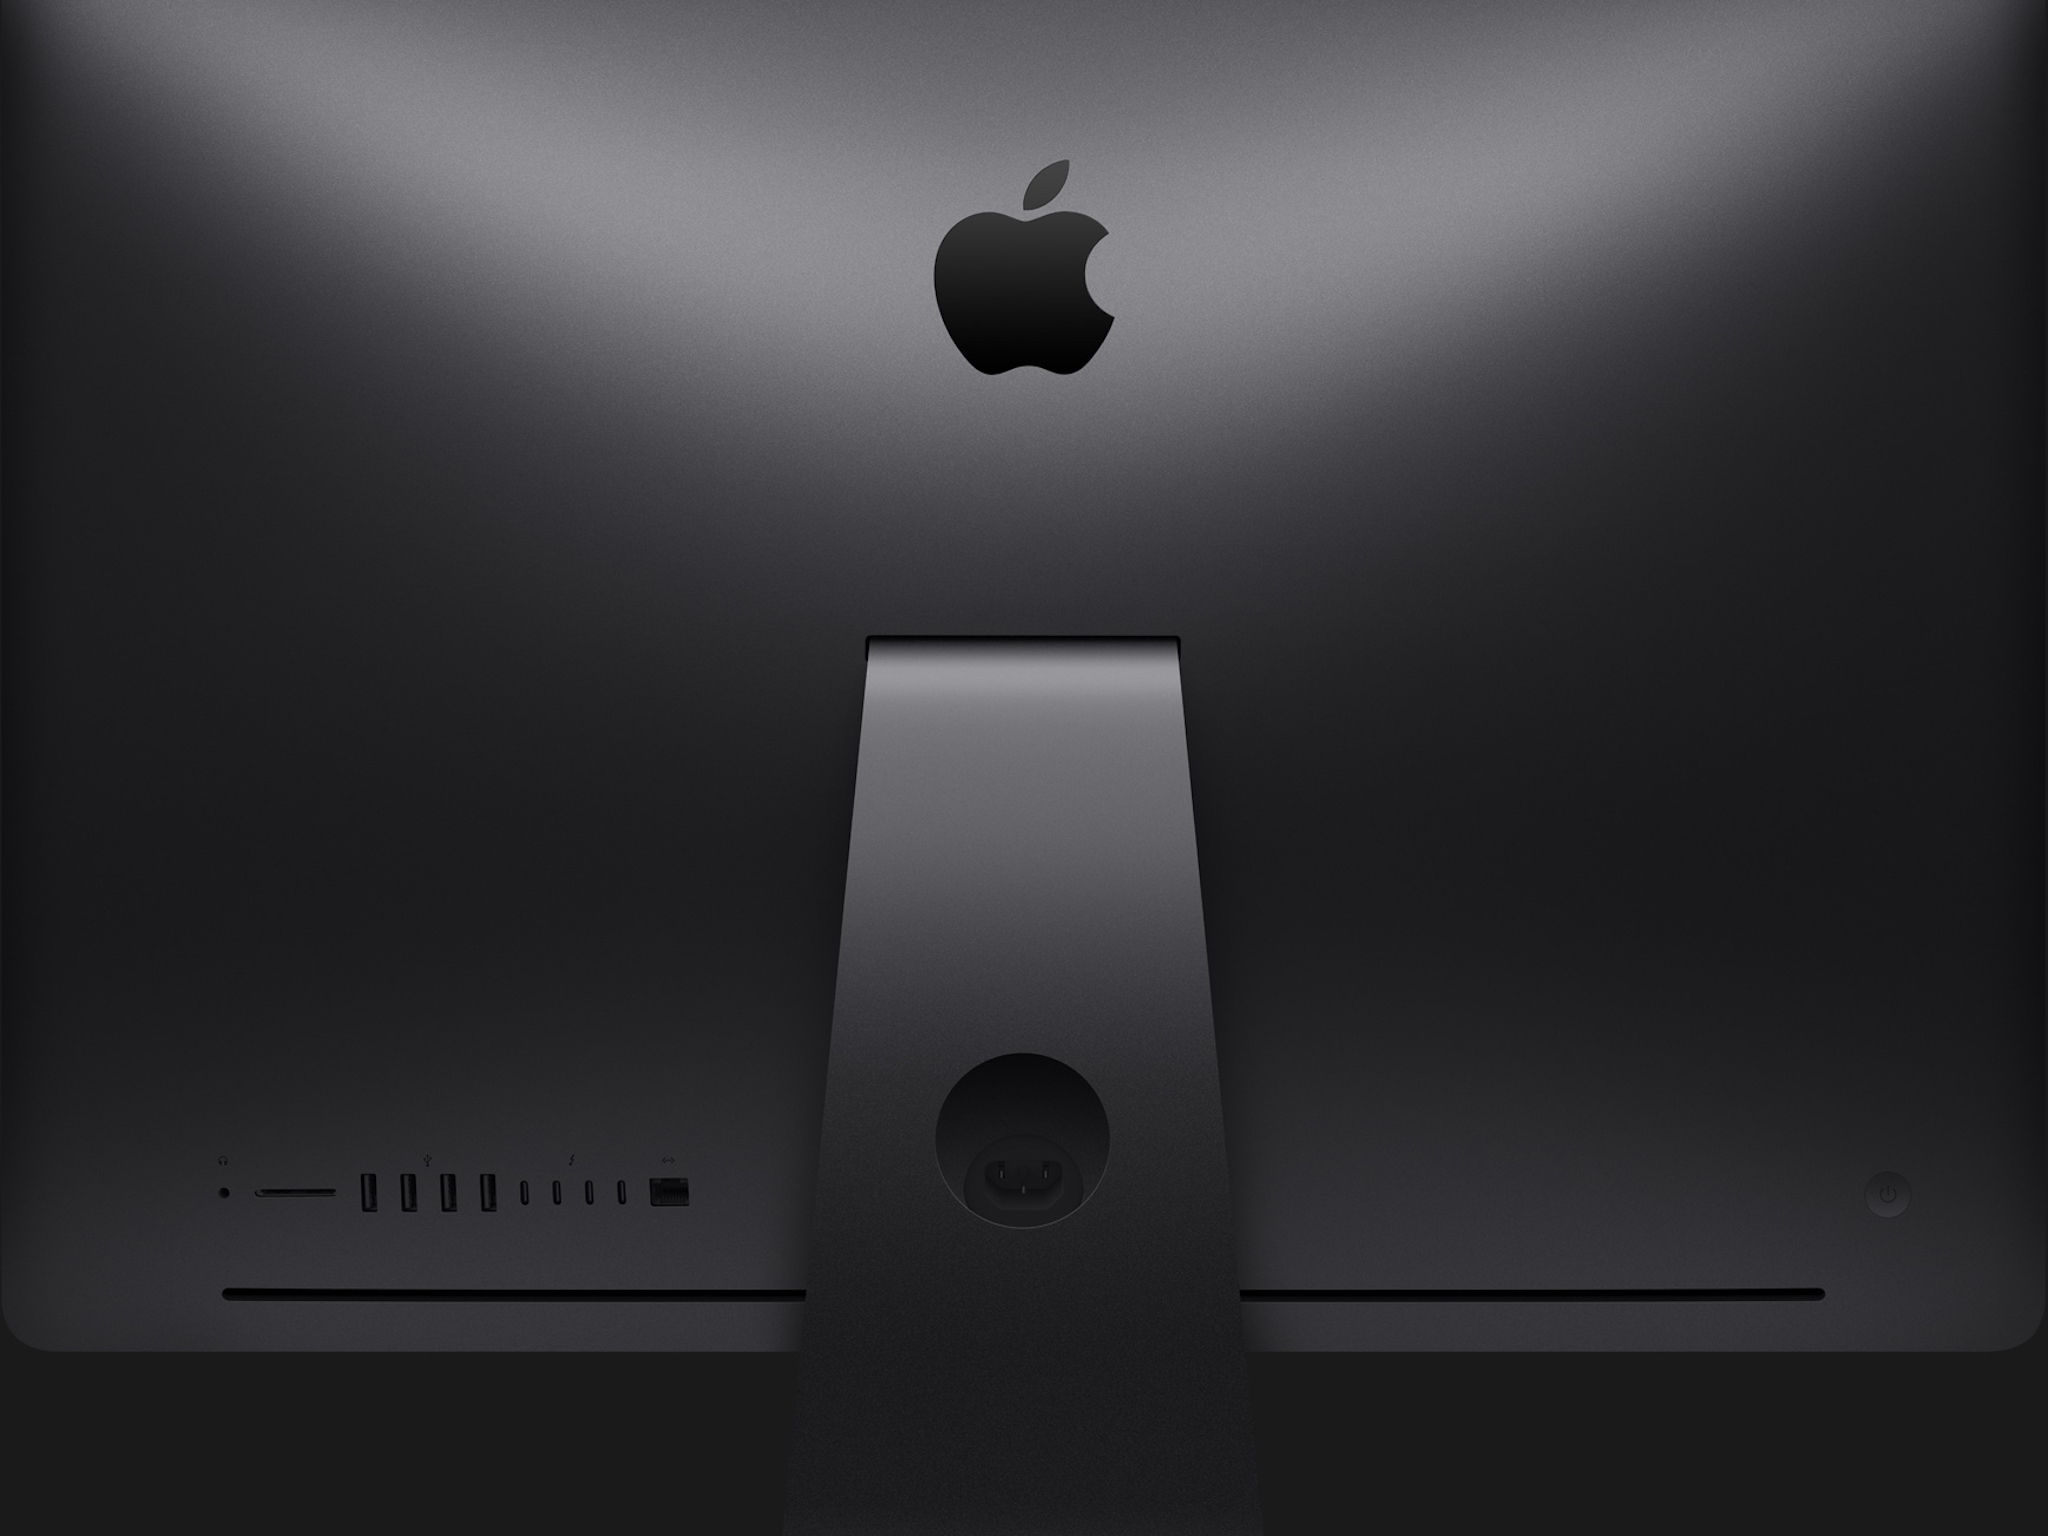 A back view of the space gray iMac Pro